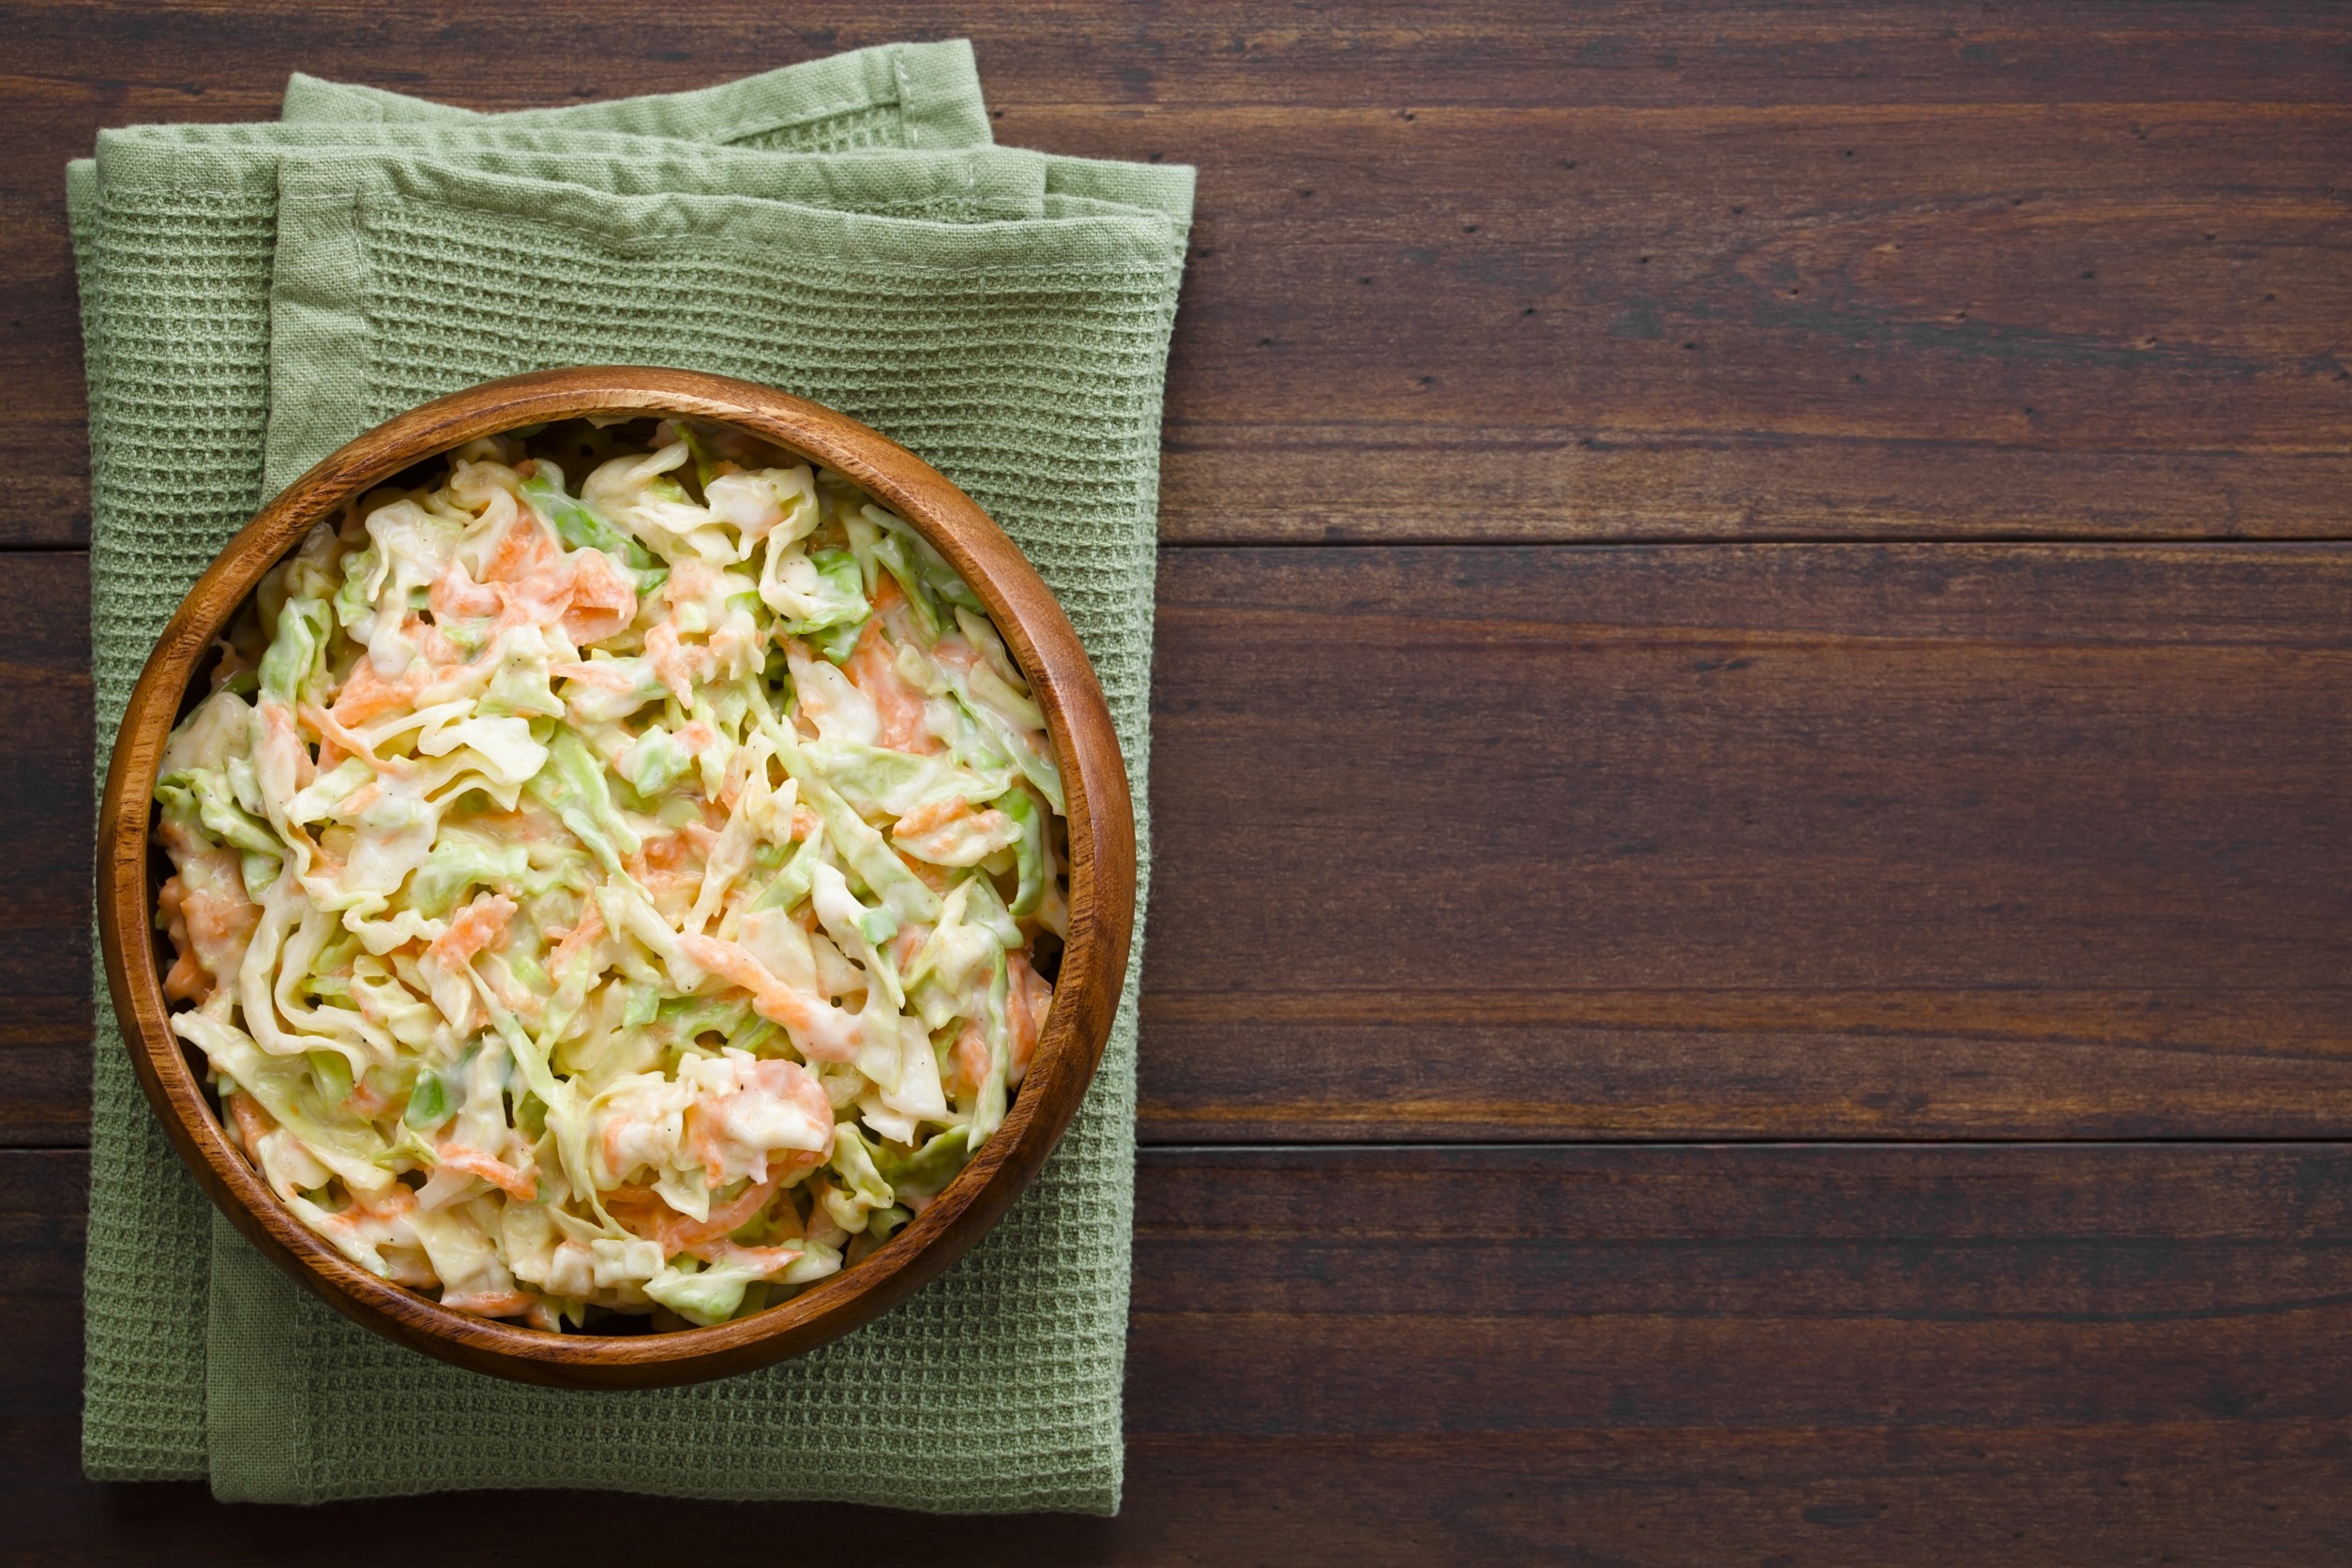 Coleslaw made of freshly shredded white cabbage and grated carrot with homemade mayonnaise-based salad dressing in wooden bowl, photographed overhead with copy space on the right side (Selective Focus, Focus on the salad)